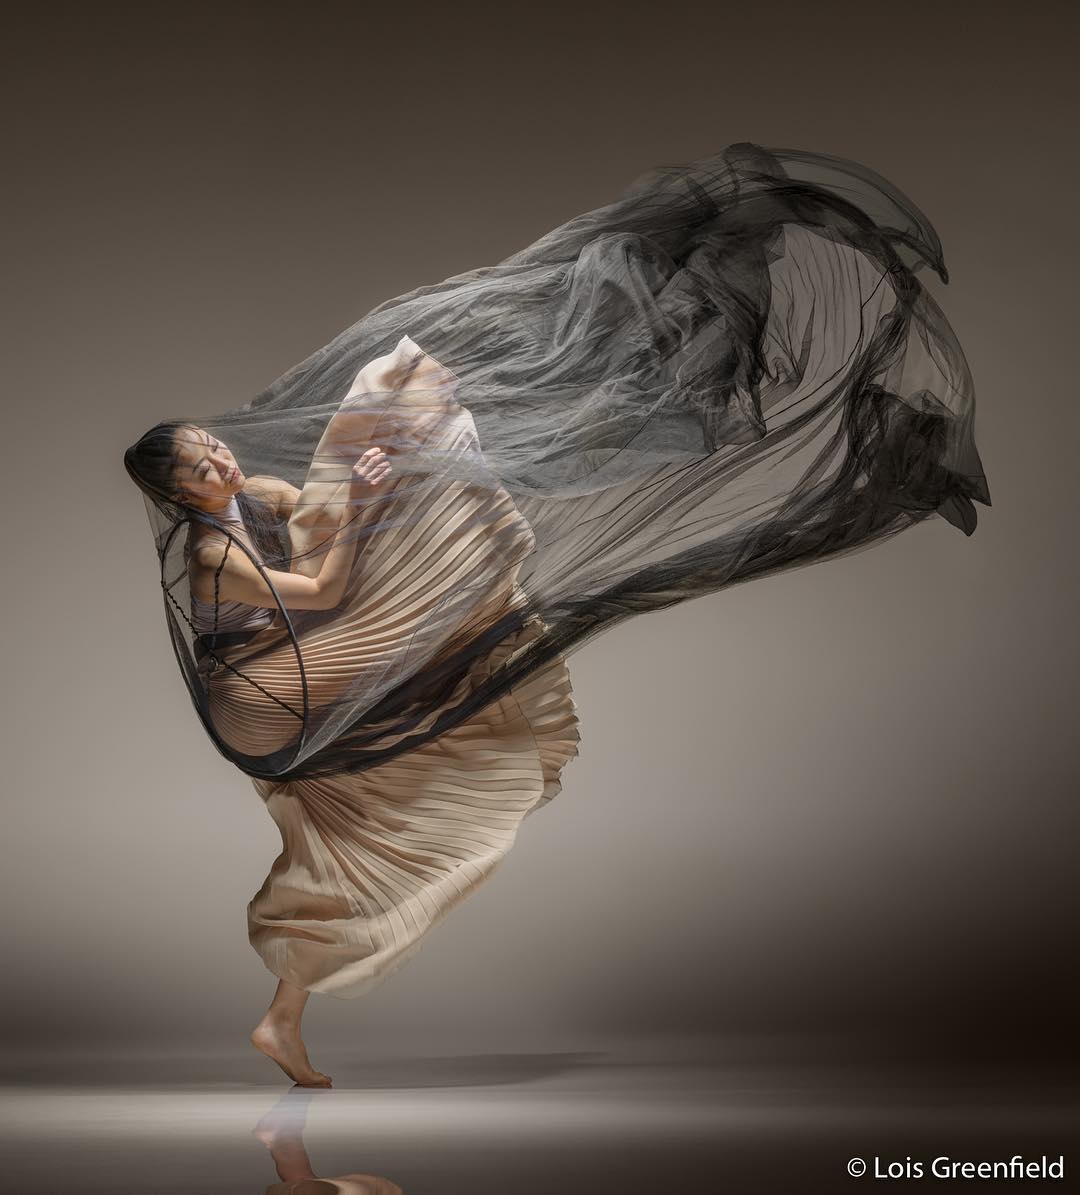 Spectacular photos of dancers in motion by Lois Greenfield